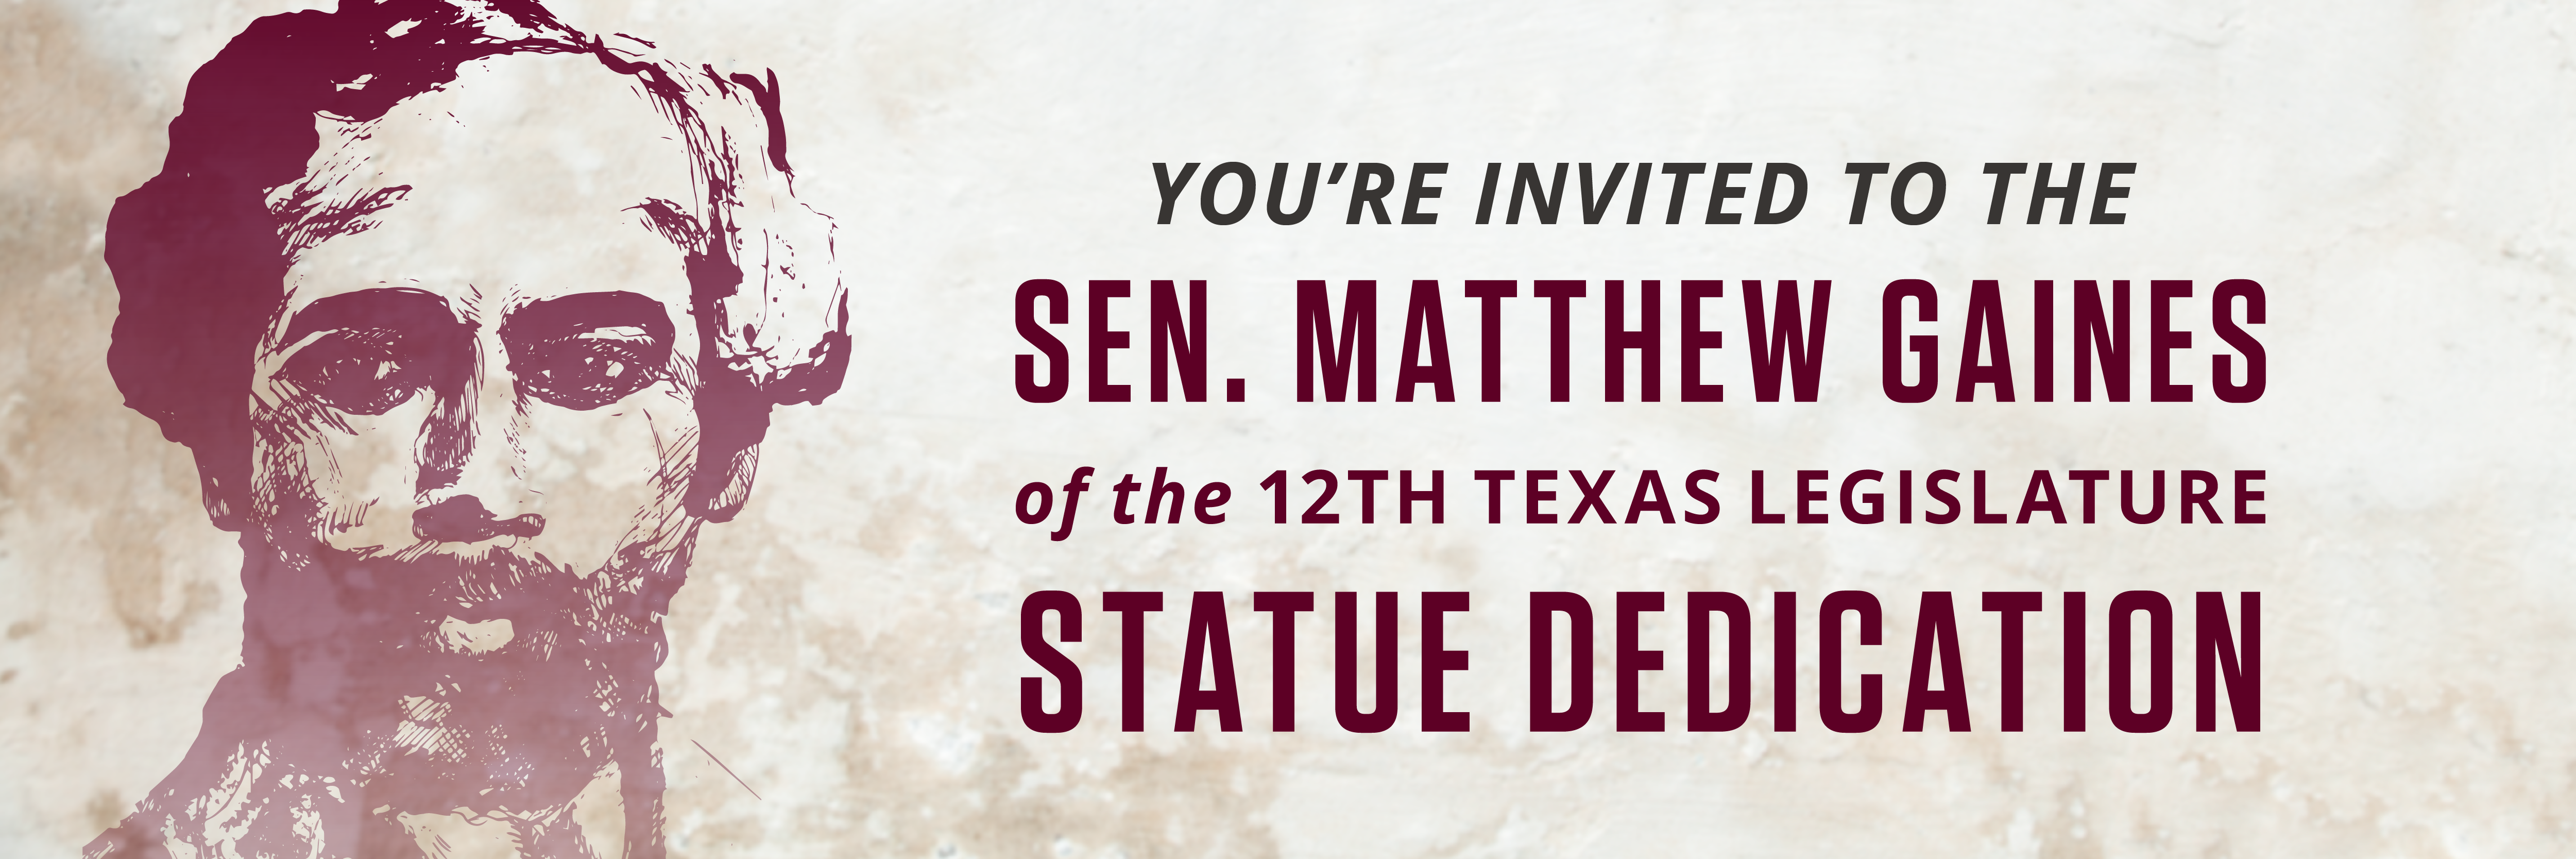 You're invited to the Sen. Matthew Gaines Statue Dedication